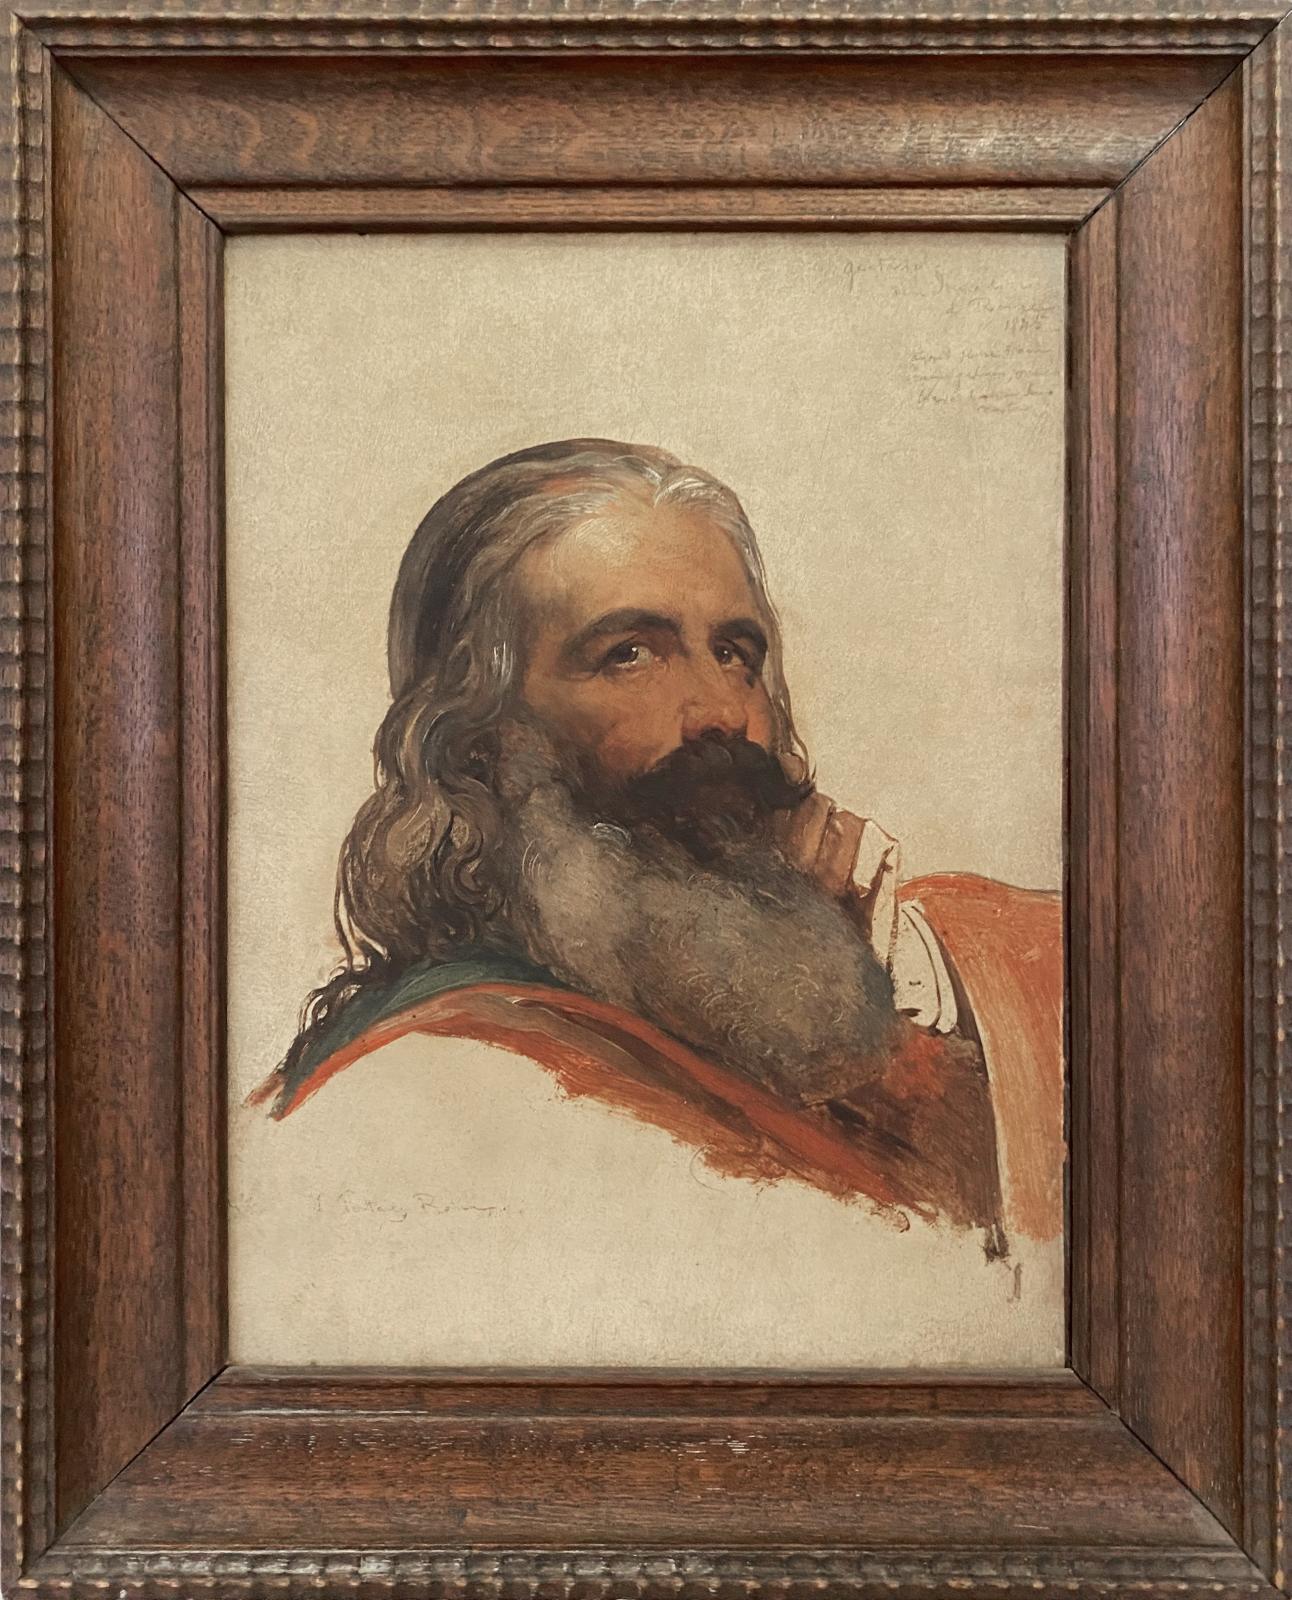 Study of the Head of a Bearded Man